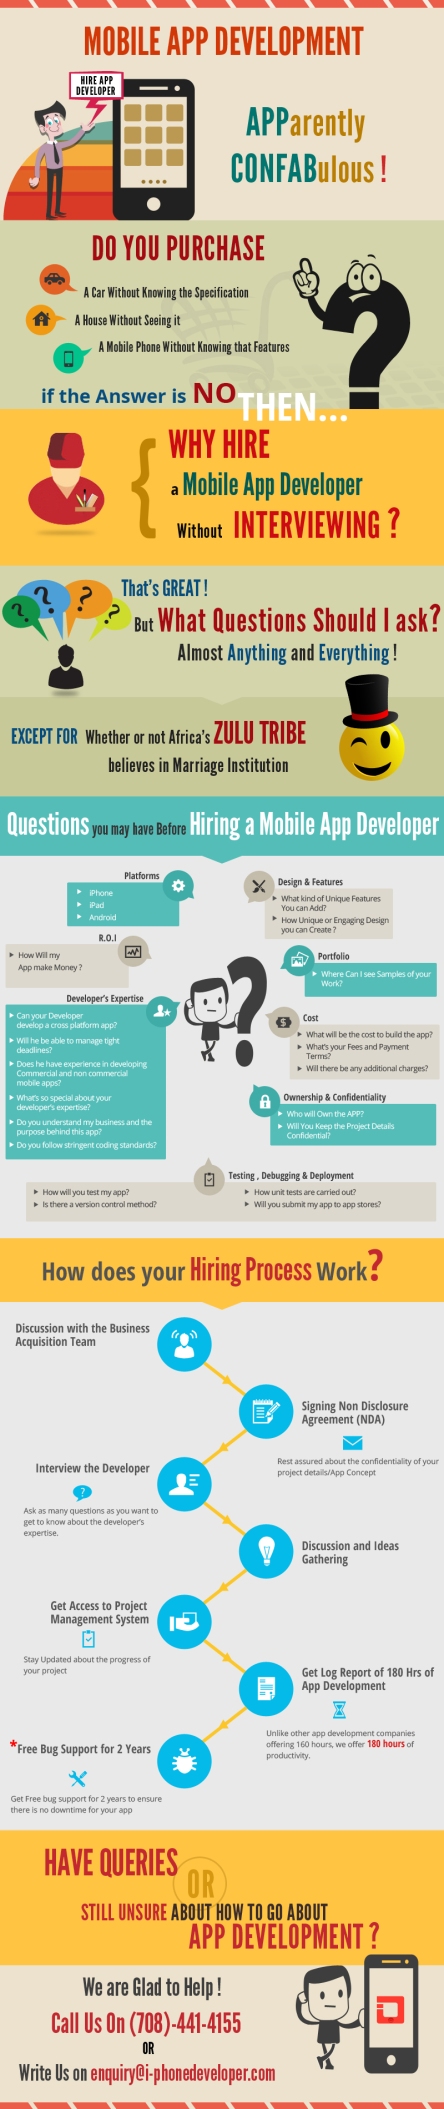 Questions to interview an app developer prior to hiring